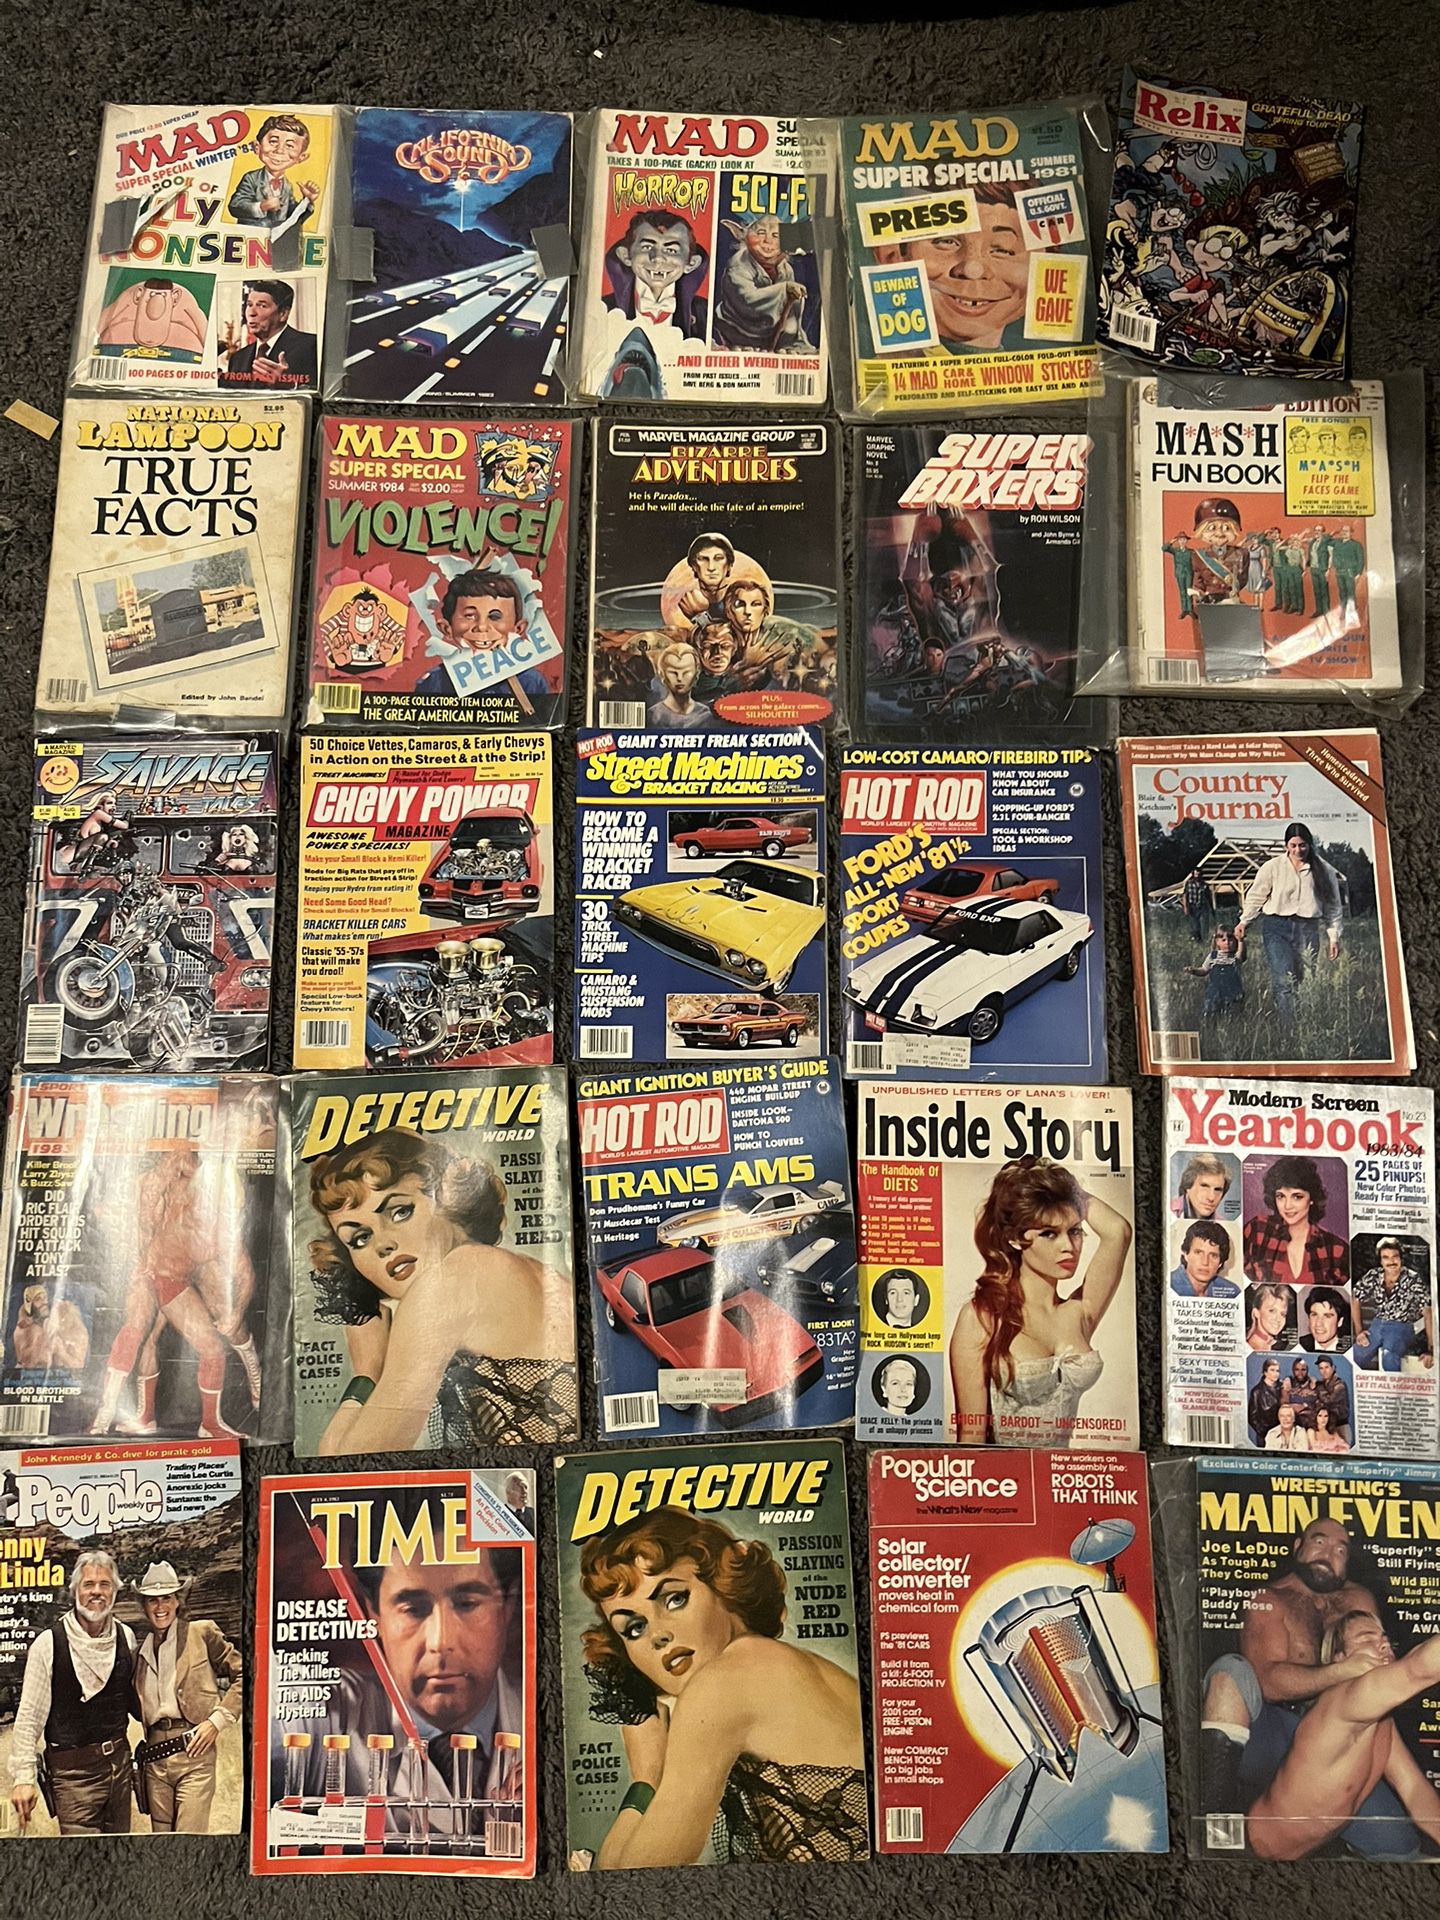 25 magazines from the 1970s